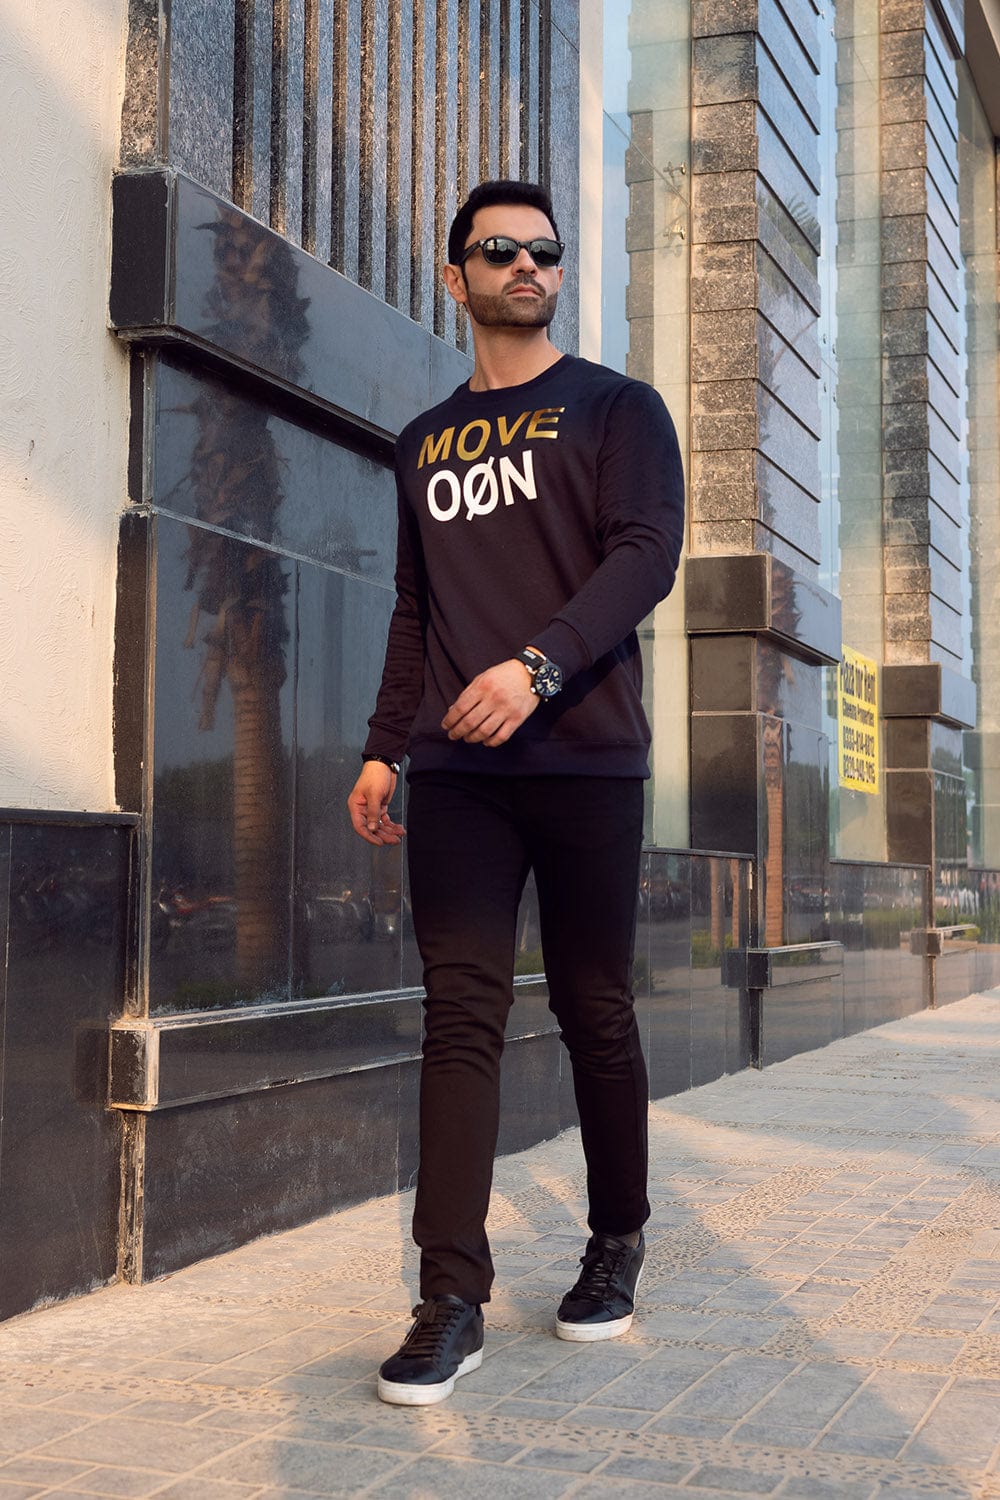 Hope Not Out by Shahid Afridi Men Sweat Shirt Foil Printed Sweat Shirt